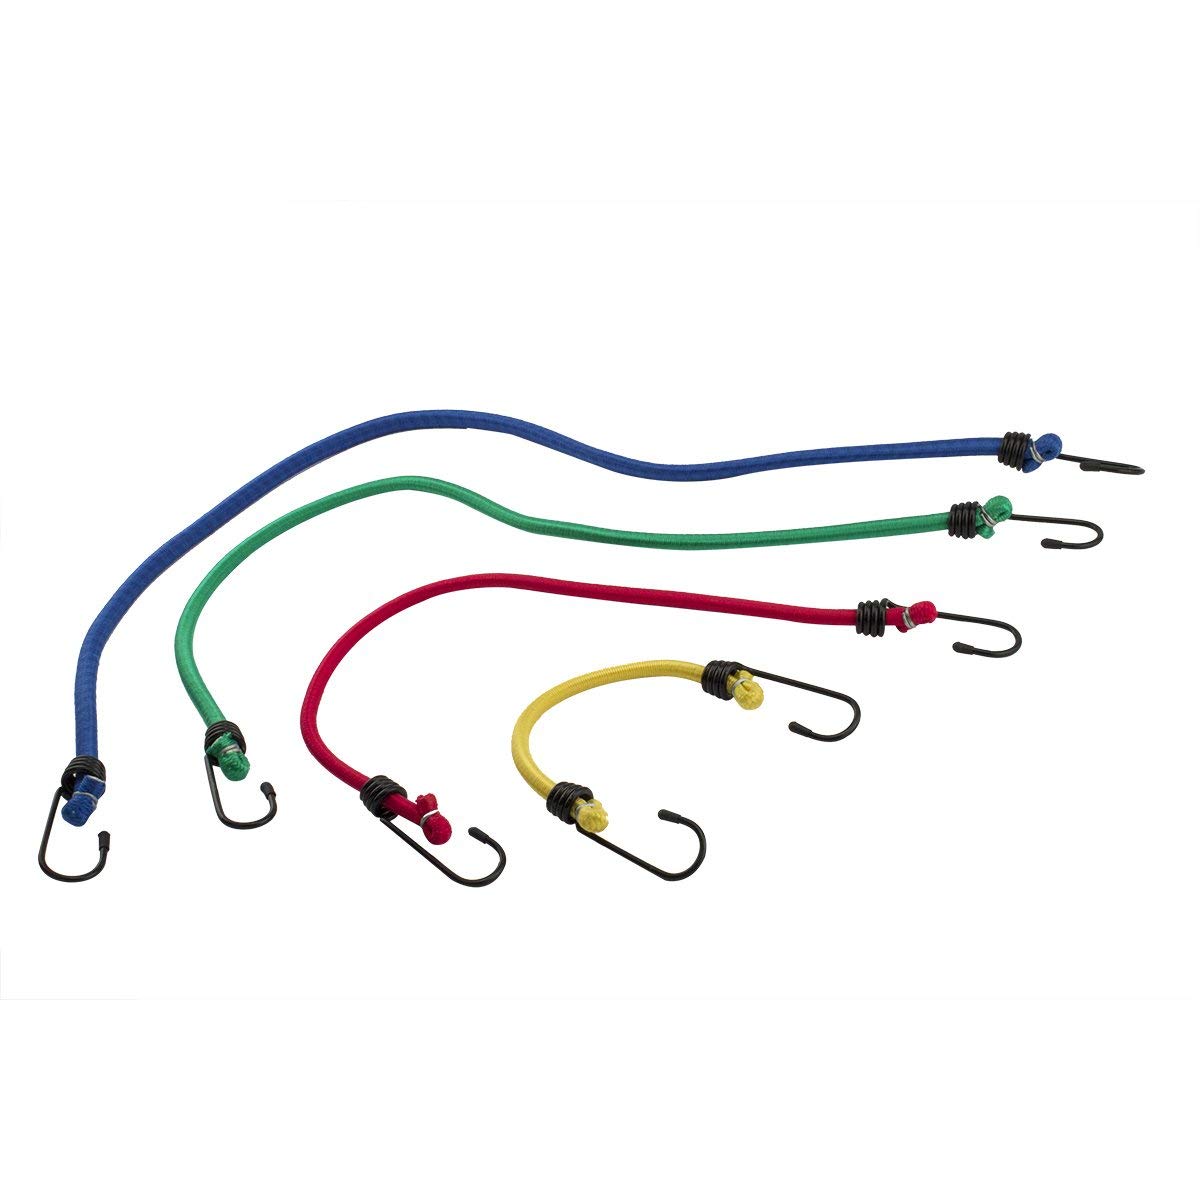 Erickson Bungee Cords - 25 Pack